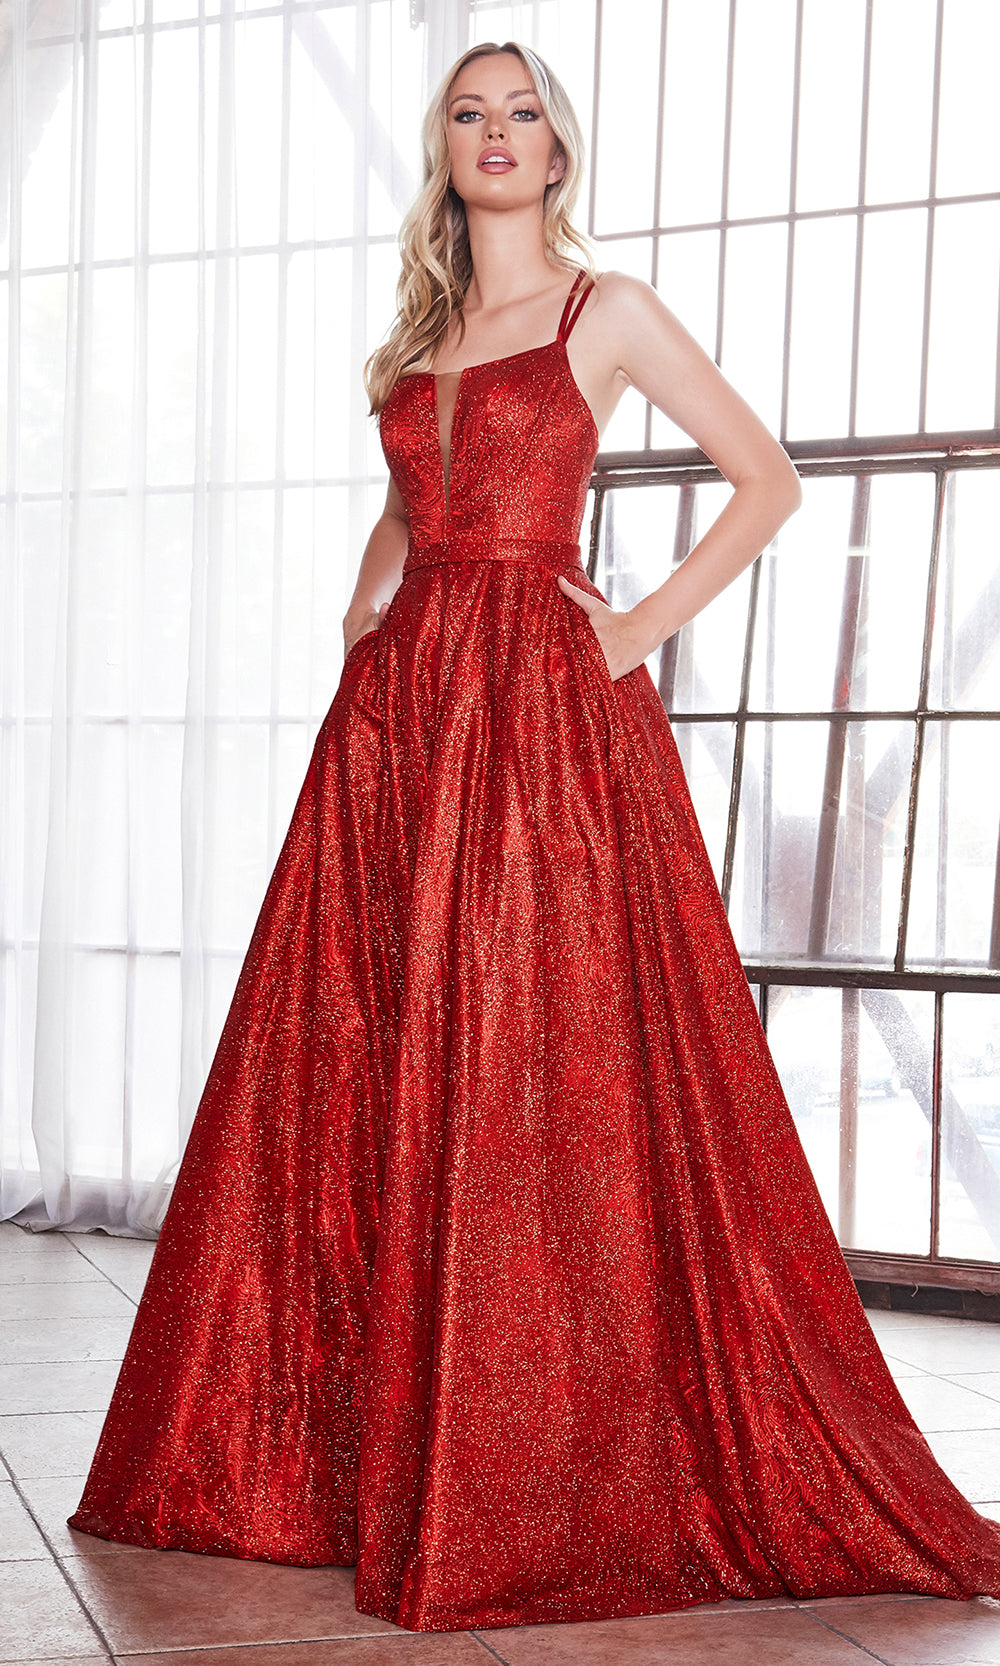 Cinderella Divine CB051 long red metallic beaded dress with straps. Perfect red evening dress for prom, quinceanera dress, indowestern gown, prom, engagement/wedding reception, debut, sweet 16. Sweet 15.Plus sizes available.jpg